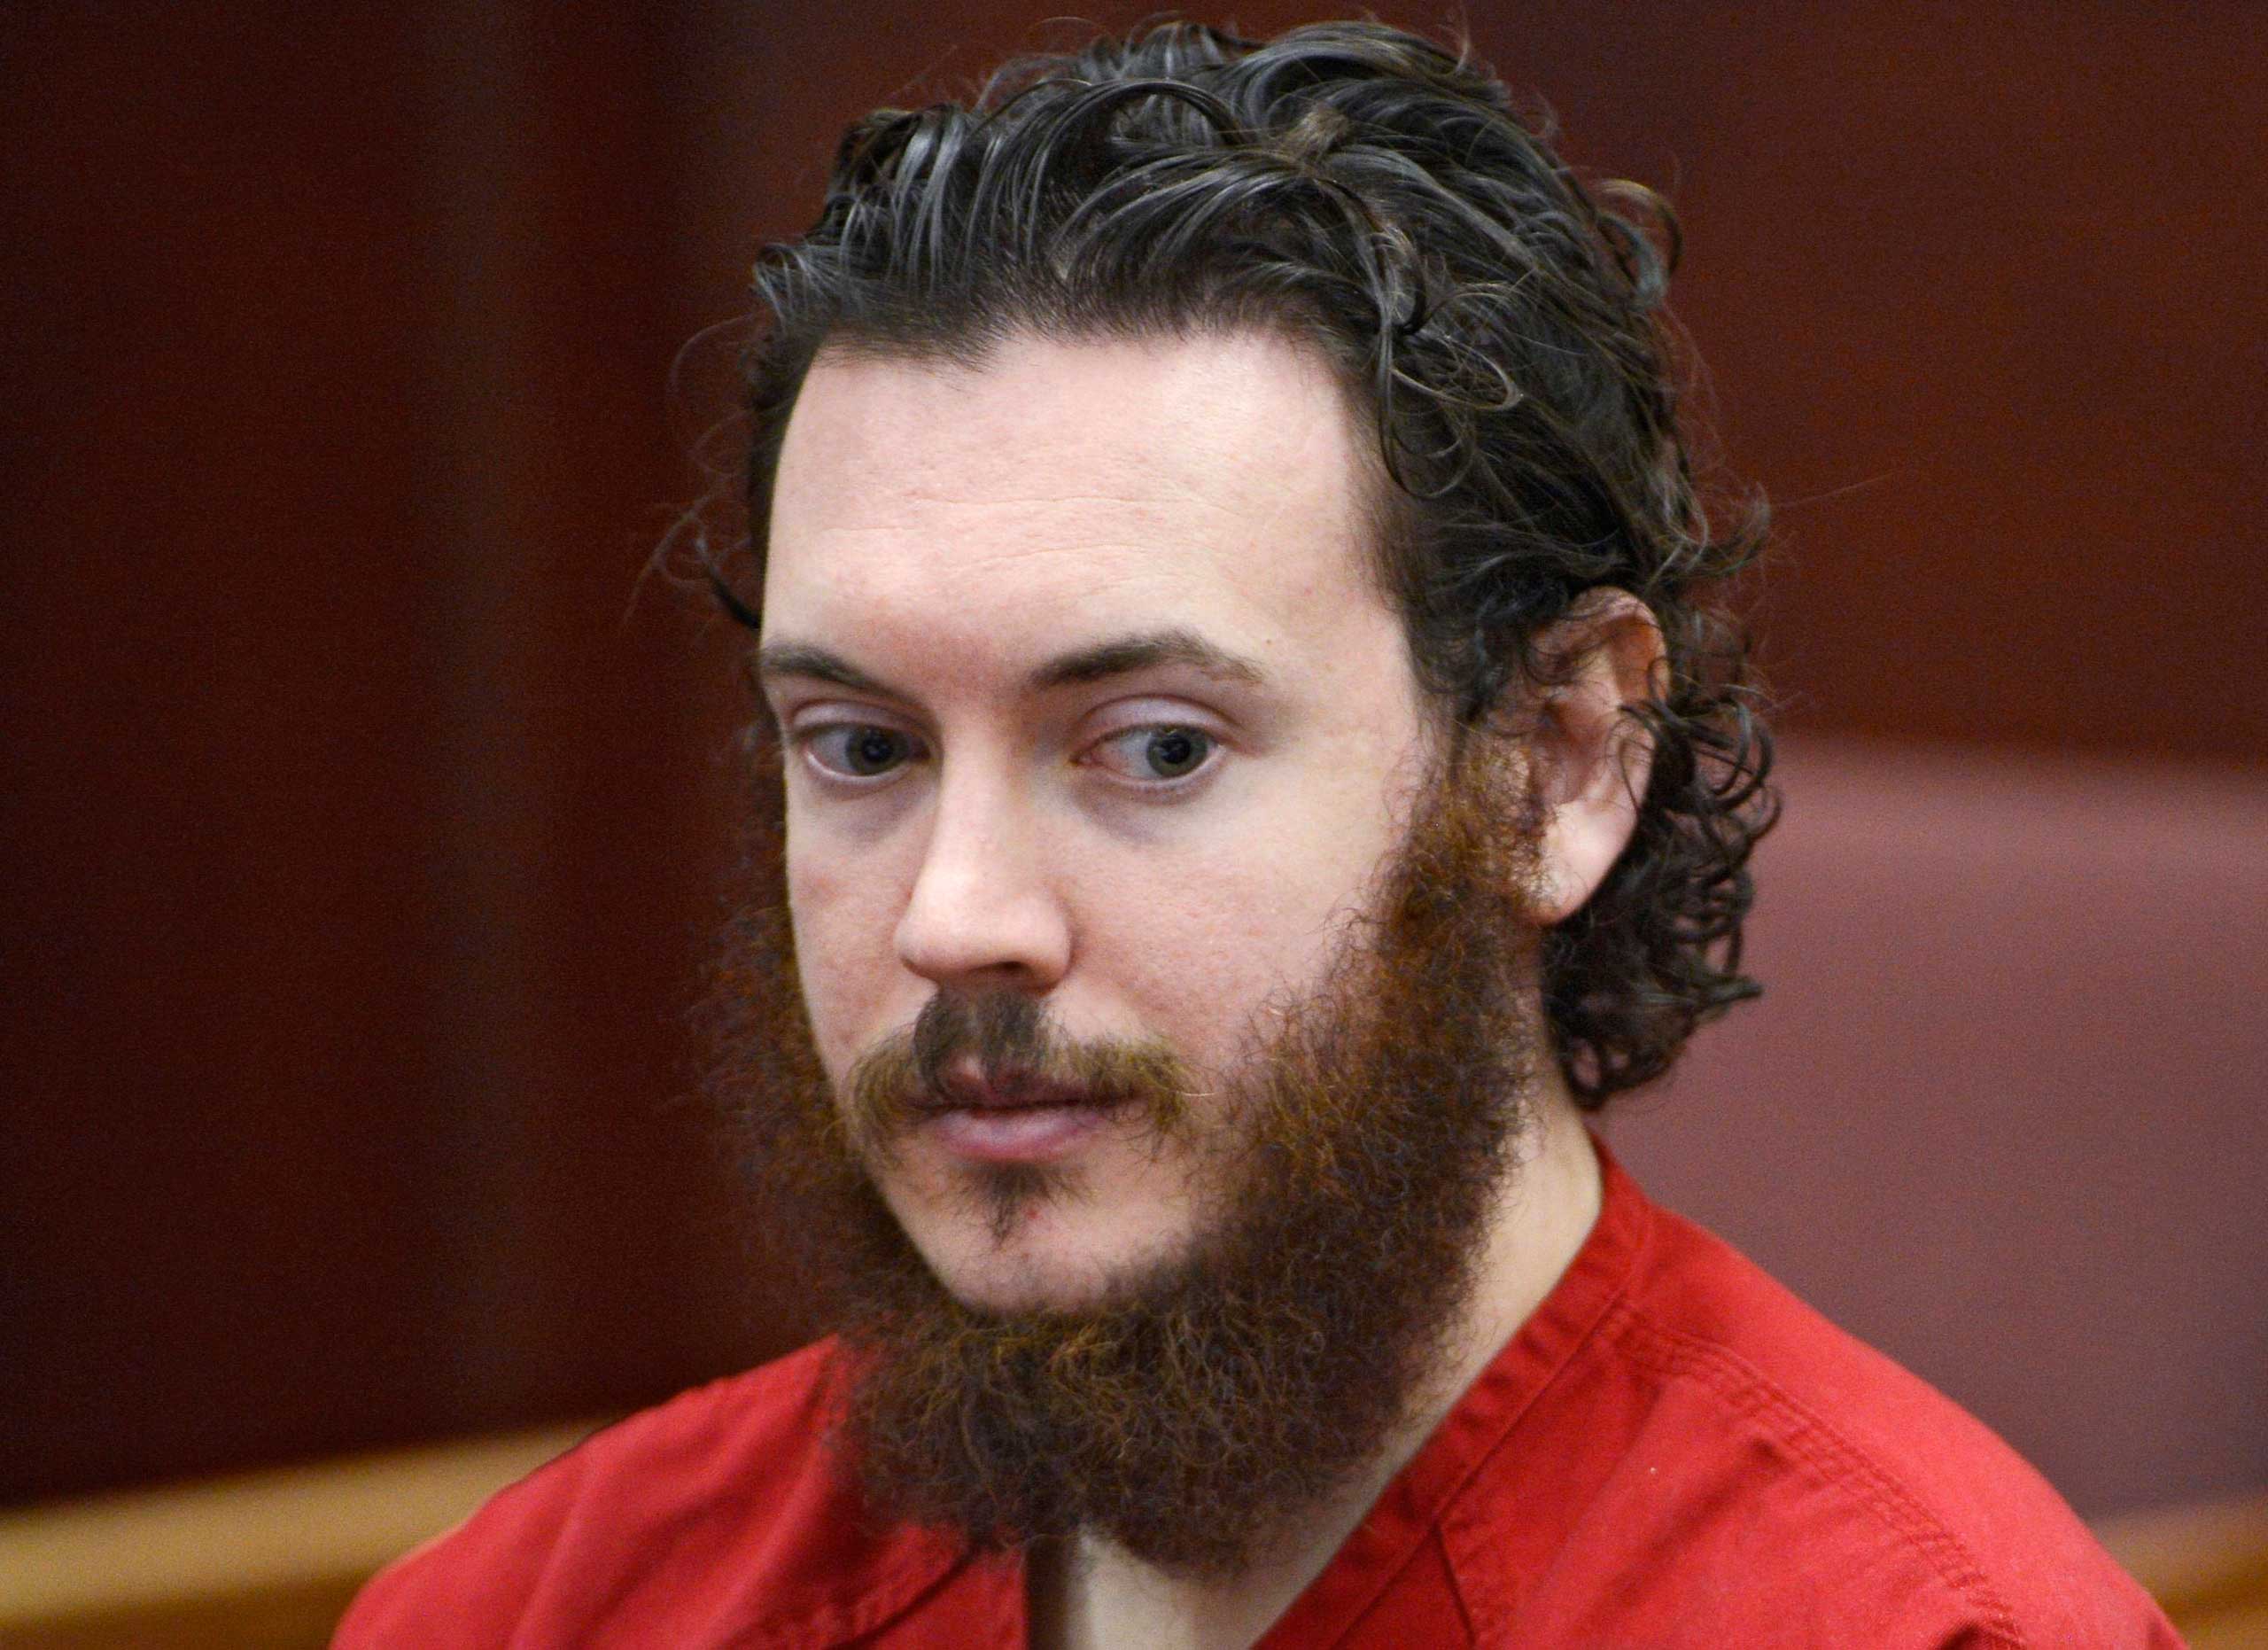 James Holmes sits in court for an advisement hearing at the Arapahoe County Justice Center in Centennial, Colo. on June 4, 2013. (Andy Cross—Pool/Reuters)